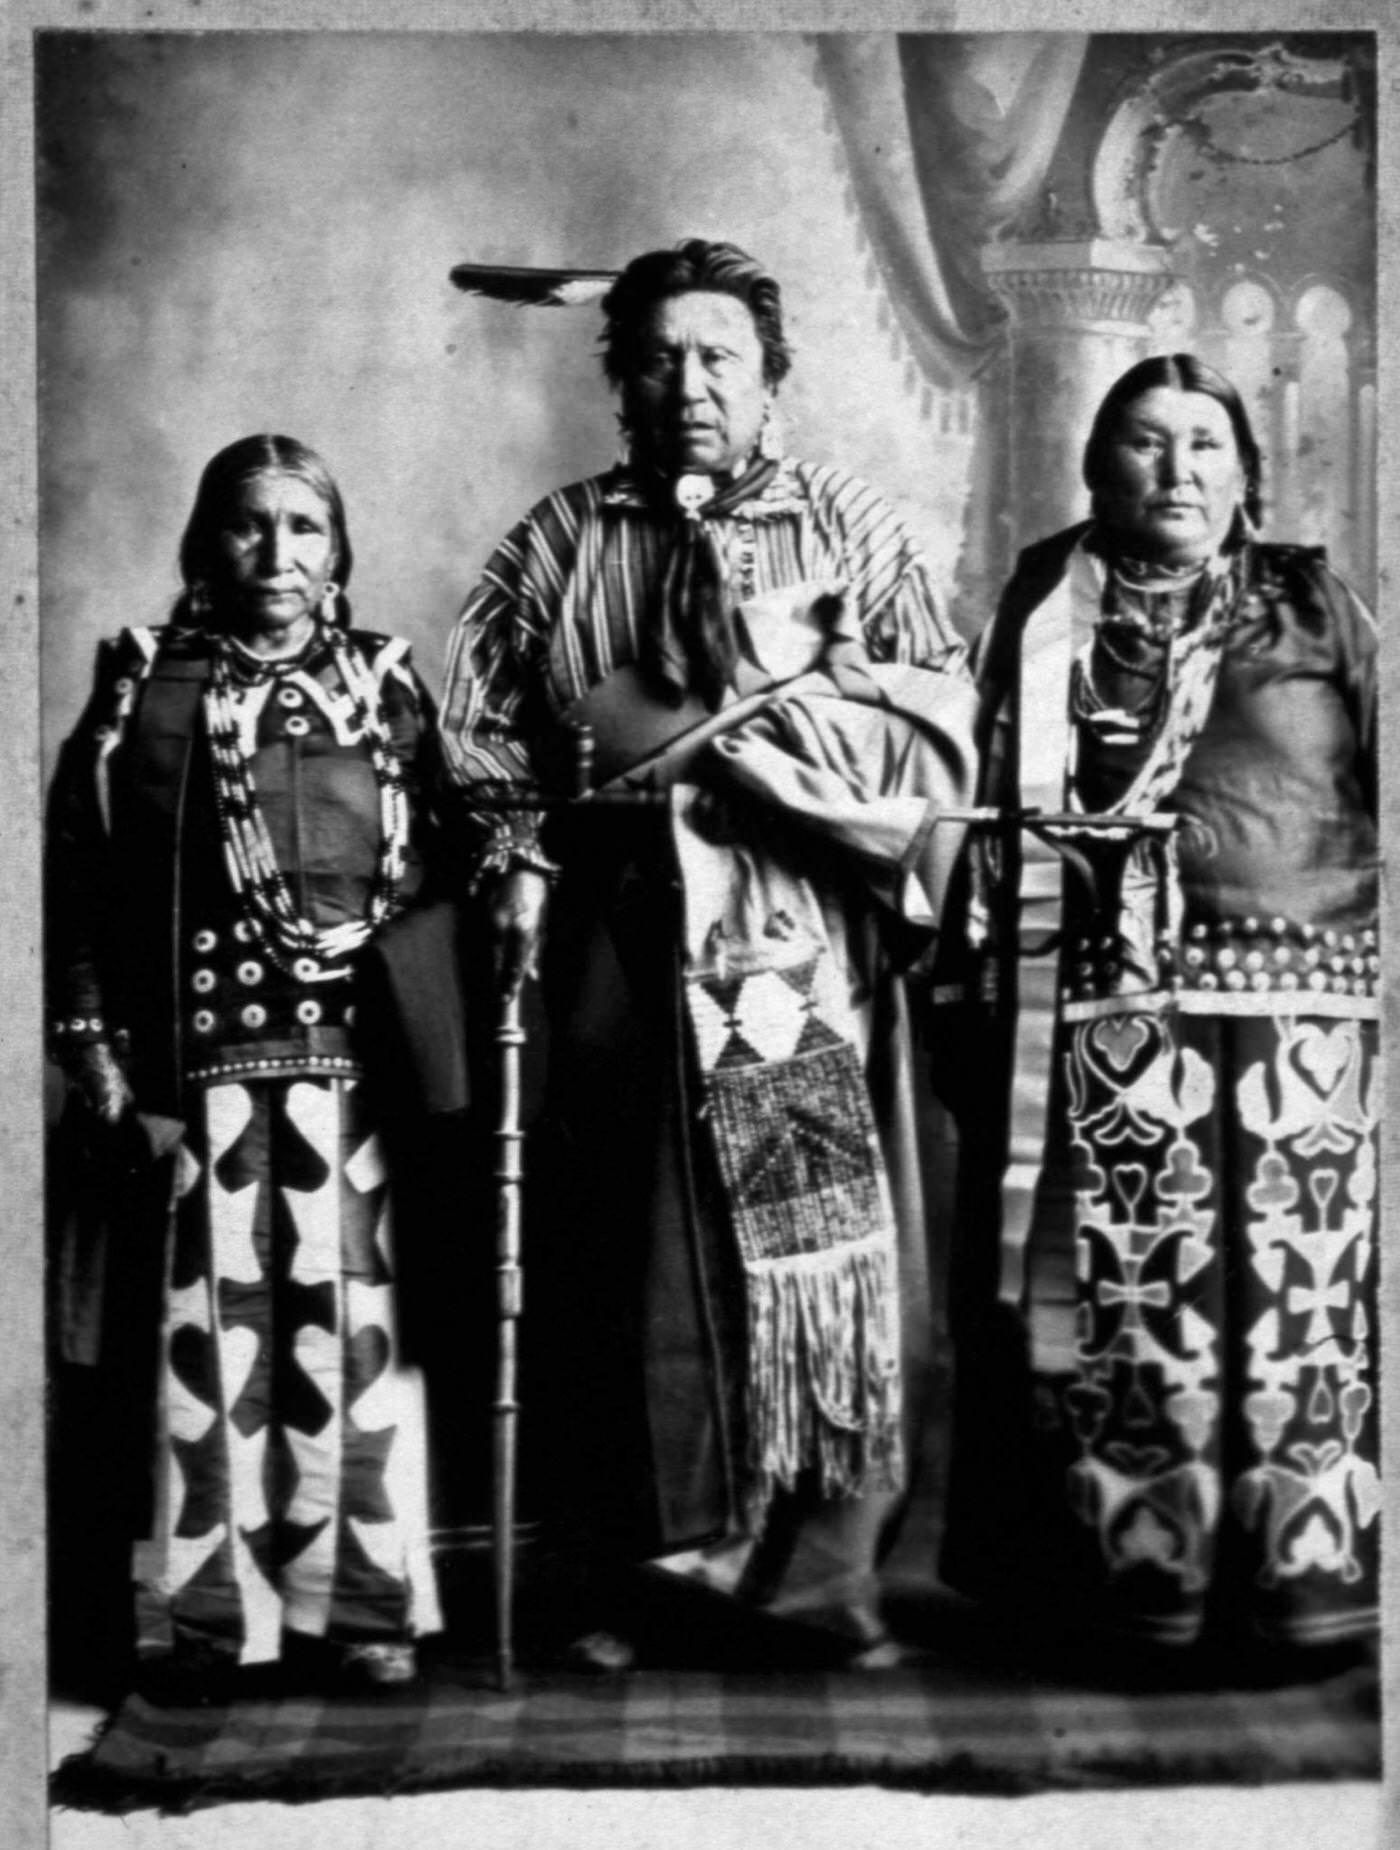 Three Iowa Native Americans pose in a studio with all their finest accouterments for a photo.